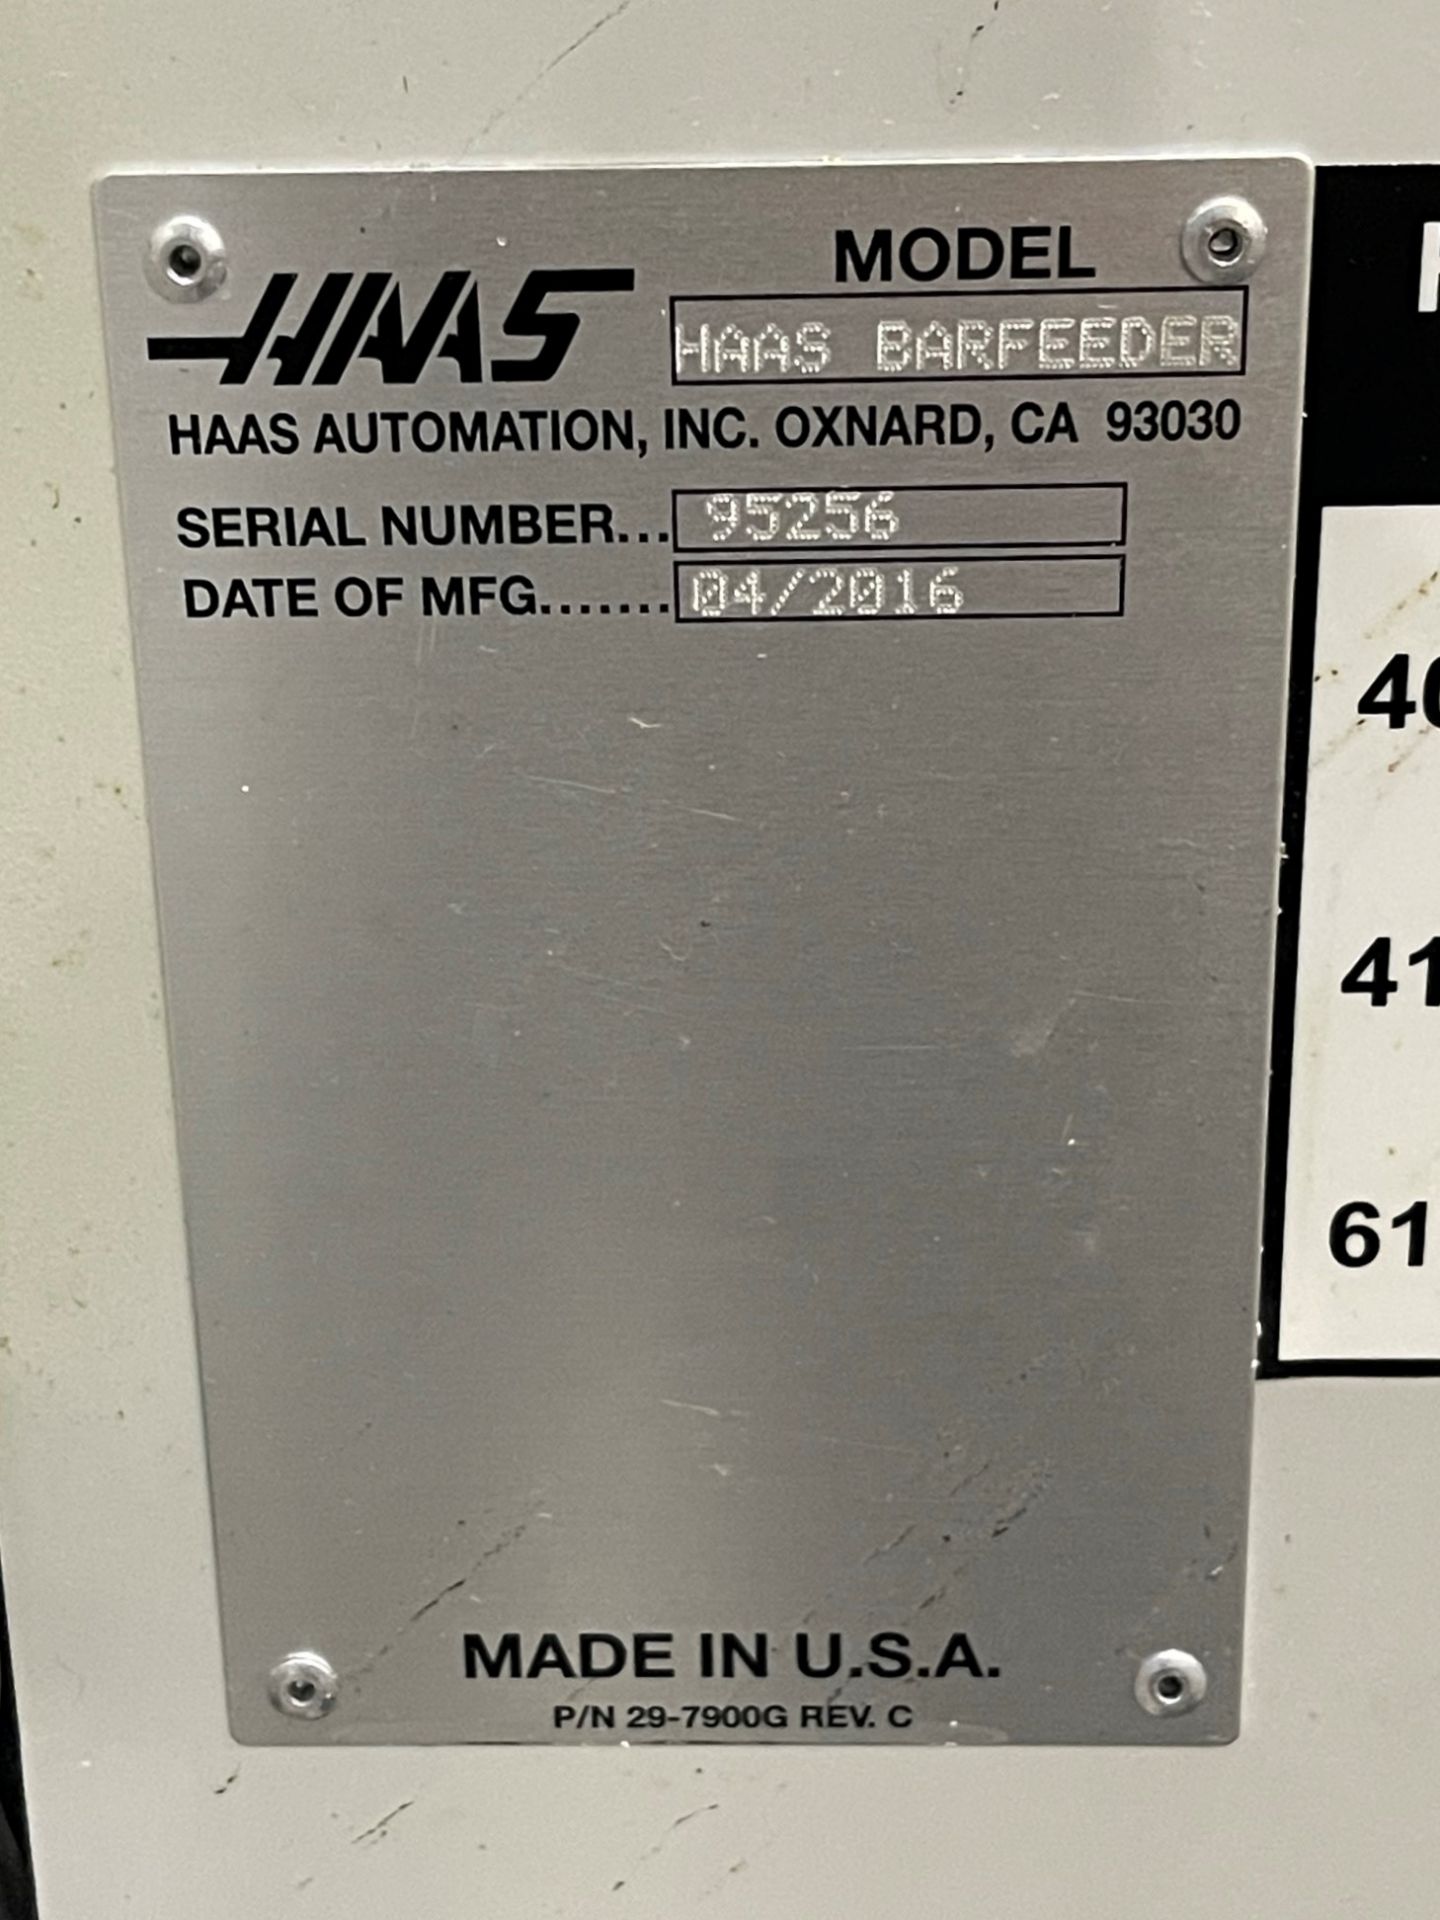 2016 Haas DS-30SS CNC Turning Center with Sub-Spindle and Live Milling, S/N 3105326 - Image 15 of 16